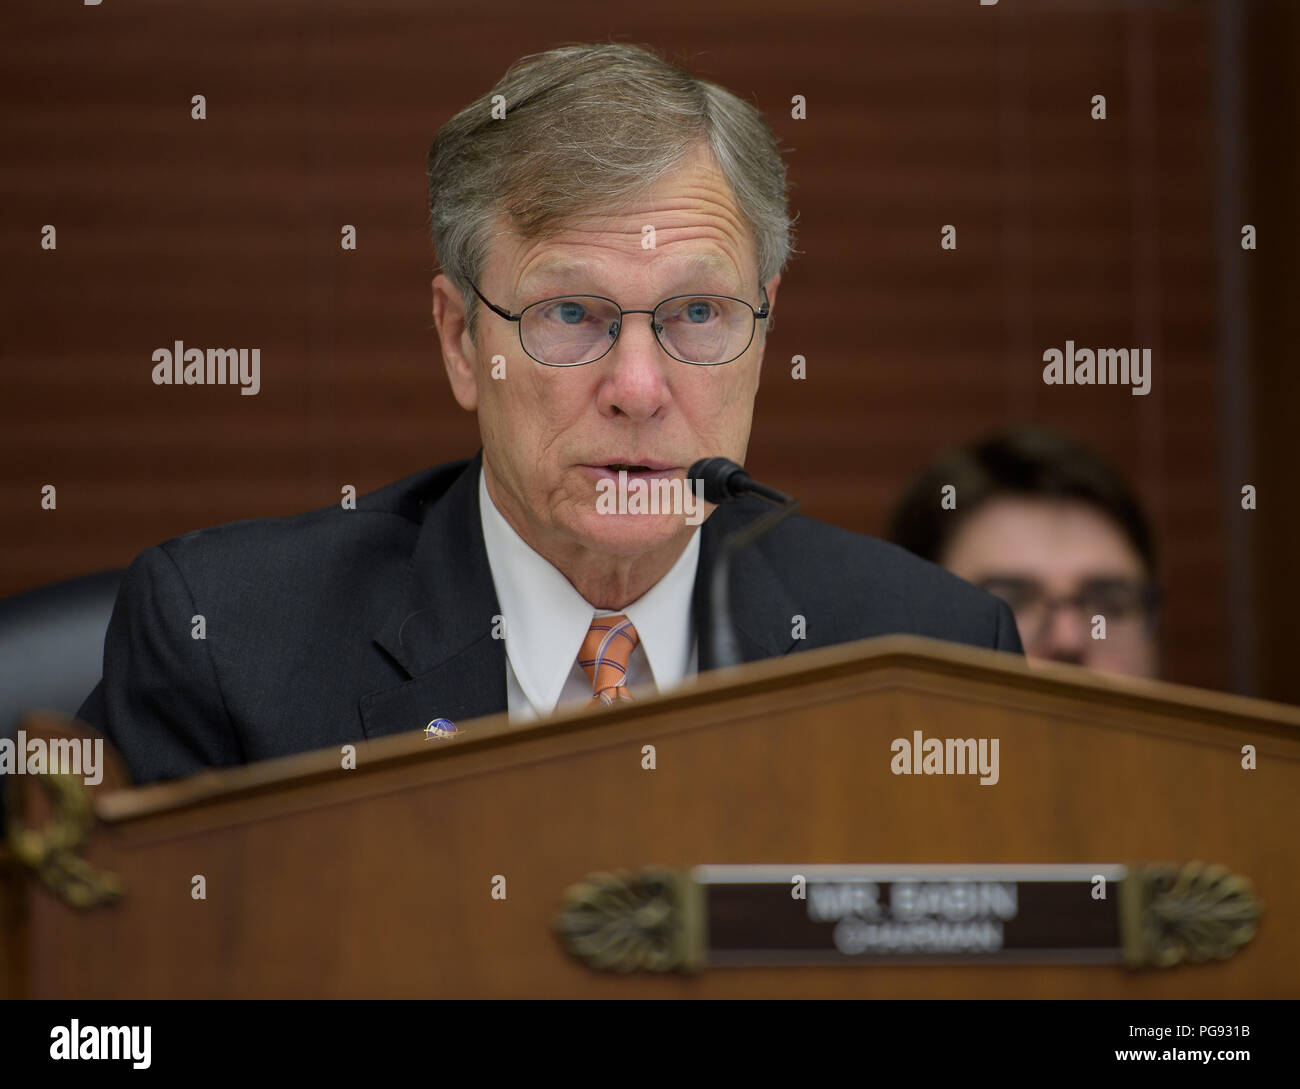 House Subcommittee on Space Chairman Rep. Brian Babin, R-Texas, is seen during a hearing overview of the NASA Budget for Fiscal Year 2019, Wednesday, March 7, 2018, at the Rayburn House Office Building in Washington. Stock Photo